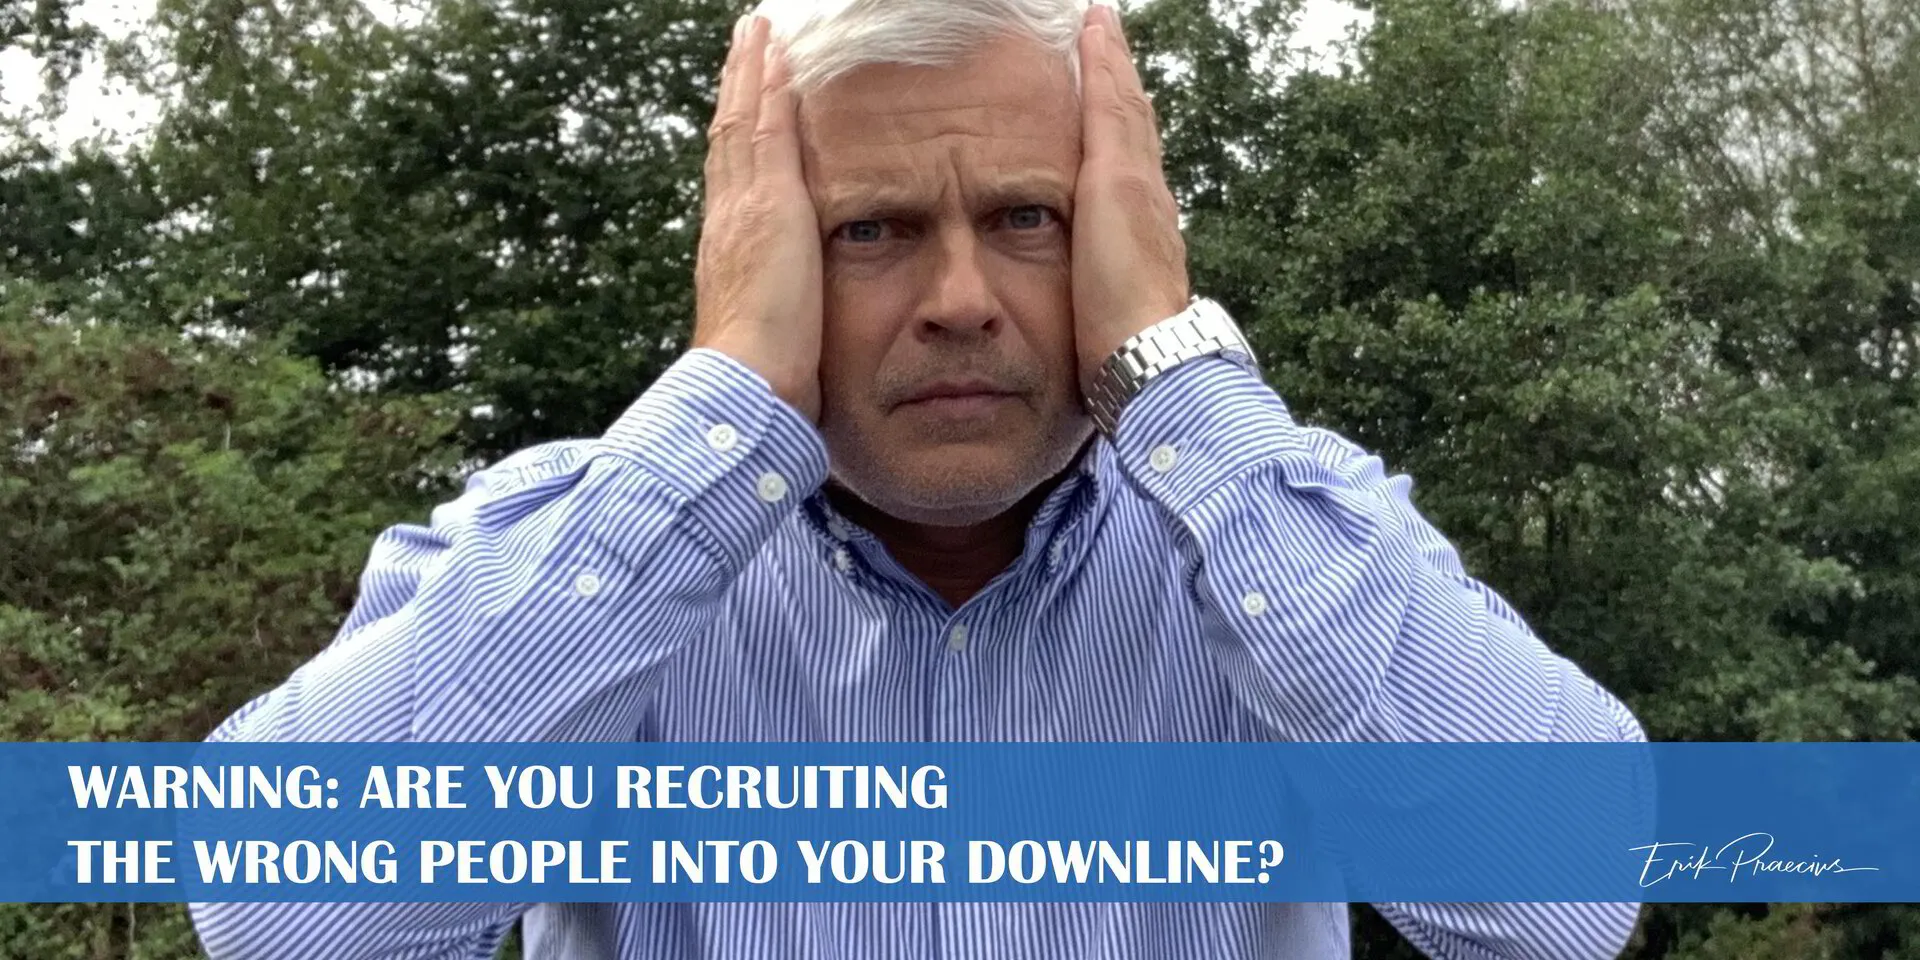 WARNING! Are You Recruiting the Wrong People into Your Downline?